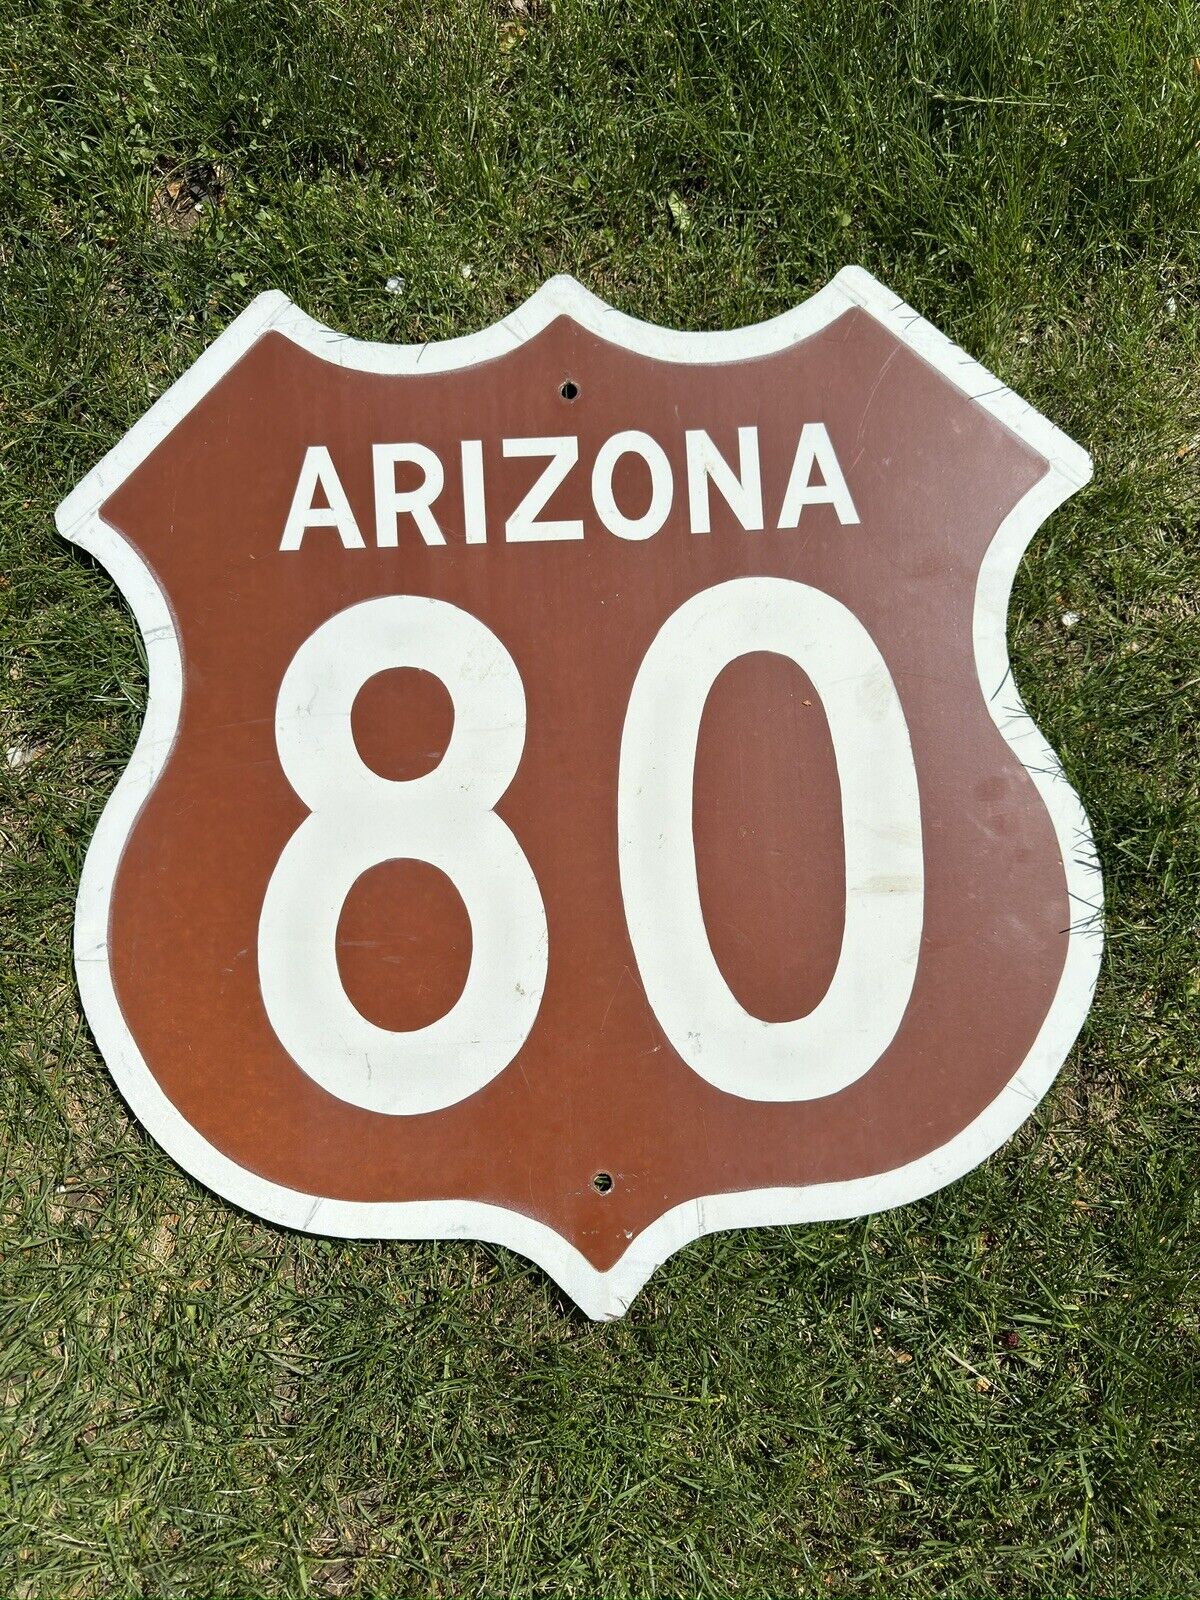 Arizona US Route 80 Brown Cutout Shield Road Highway Sign